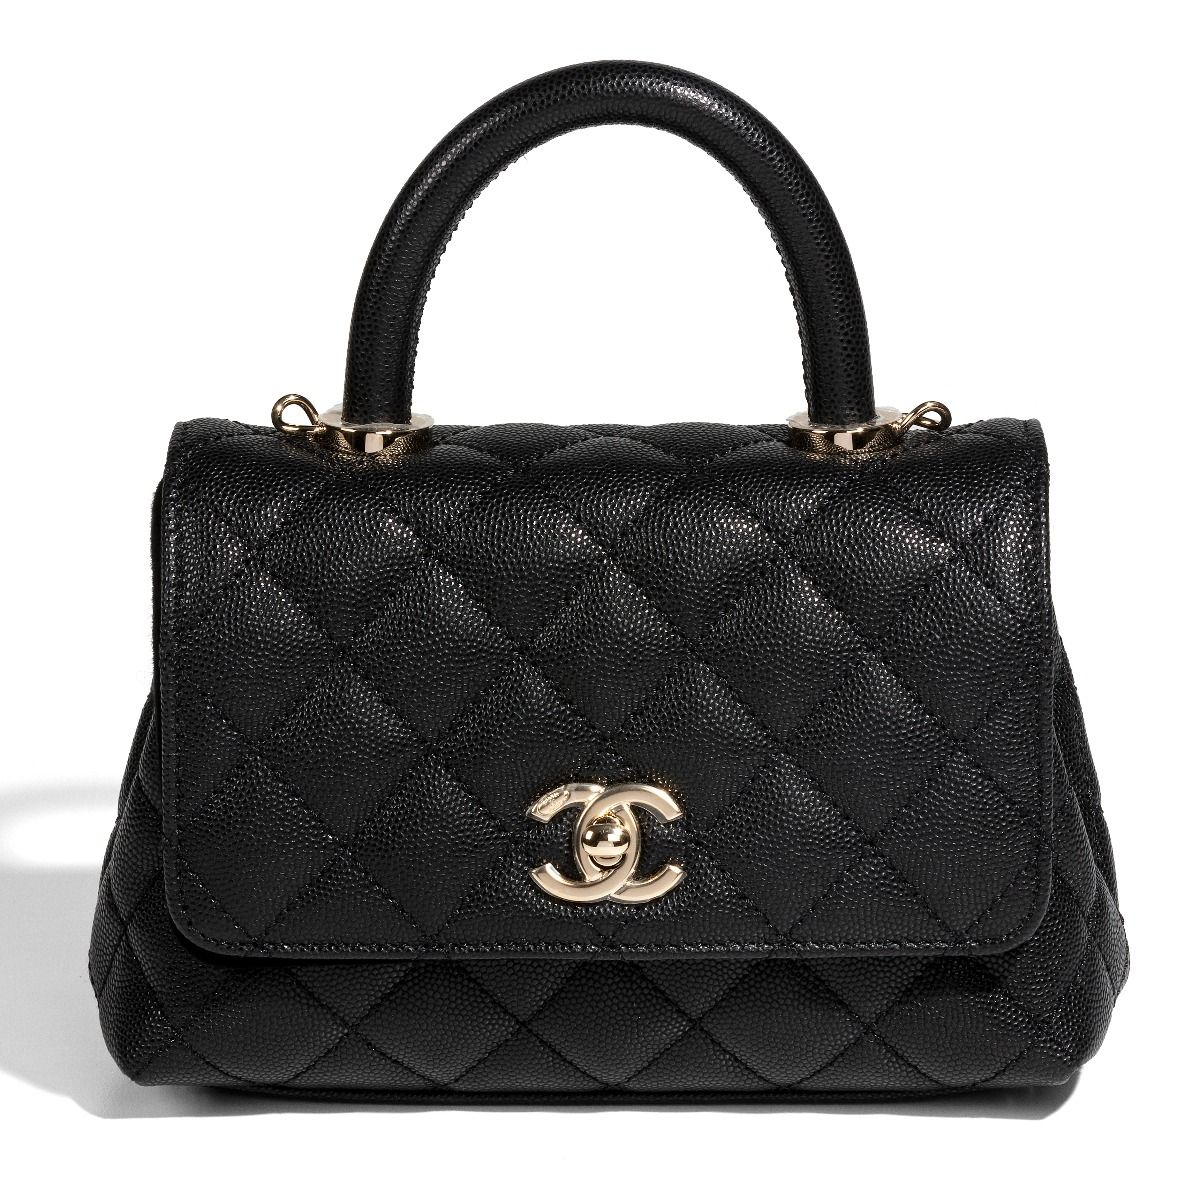 LUXURIOUS AND SUSTAINABLE: HOW BUYING A CHANEL SECOND-HAND HANDBAG IS A FASHION STATEMENT WITH A CONSCIENCE